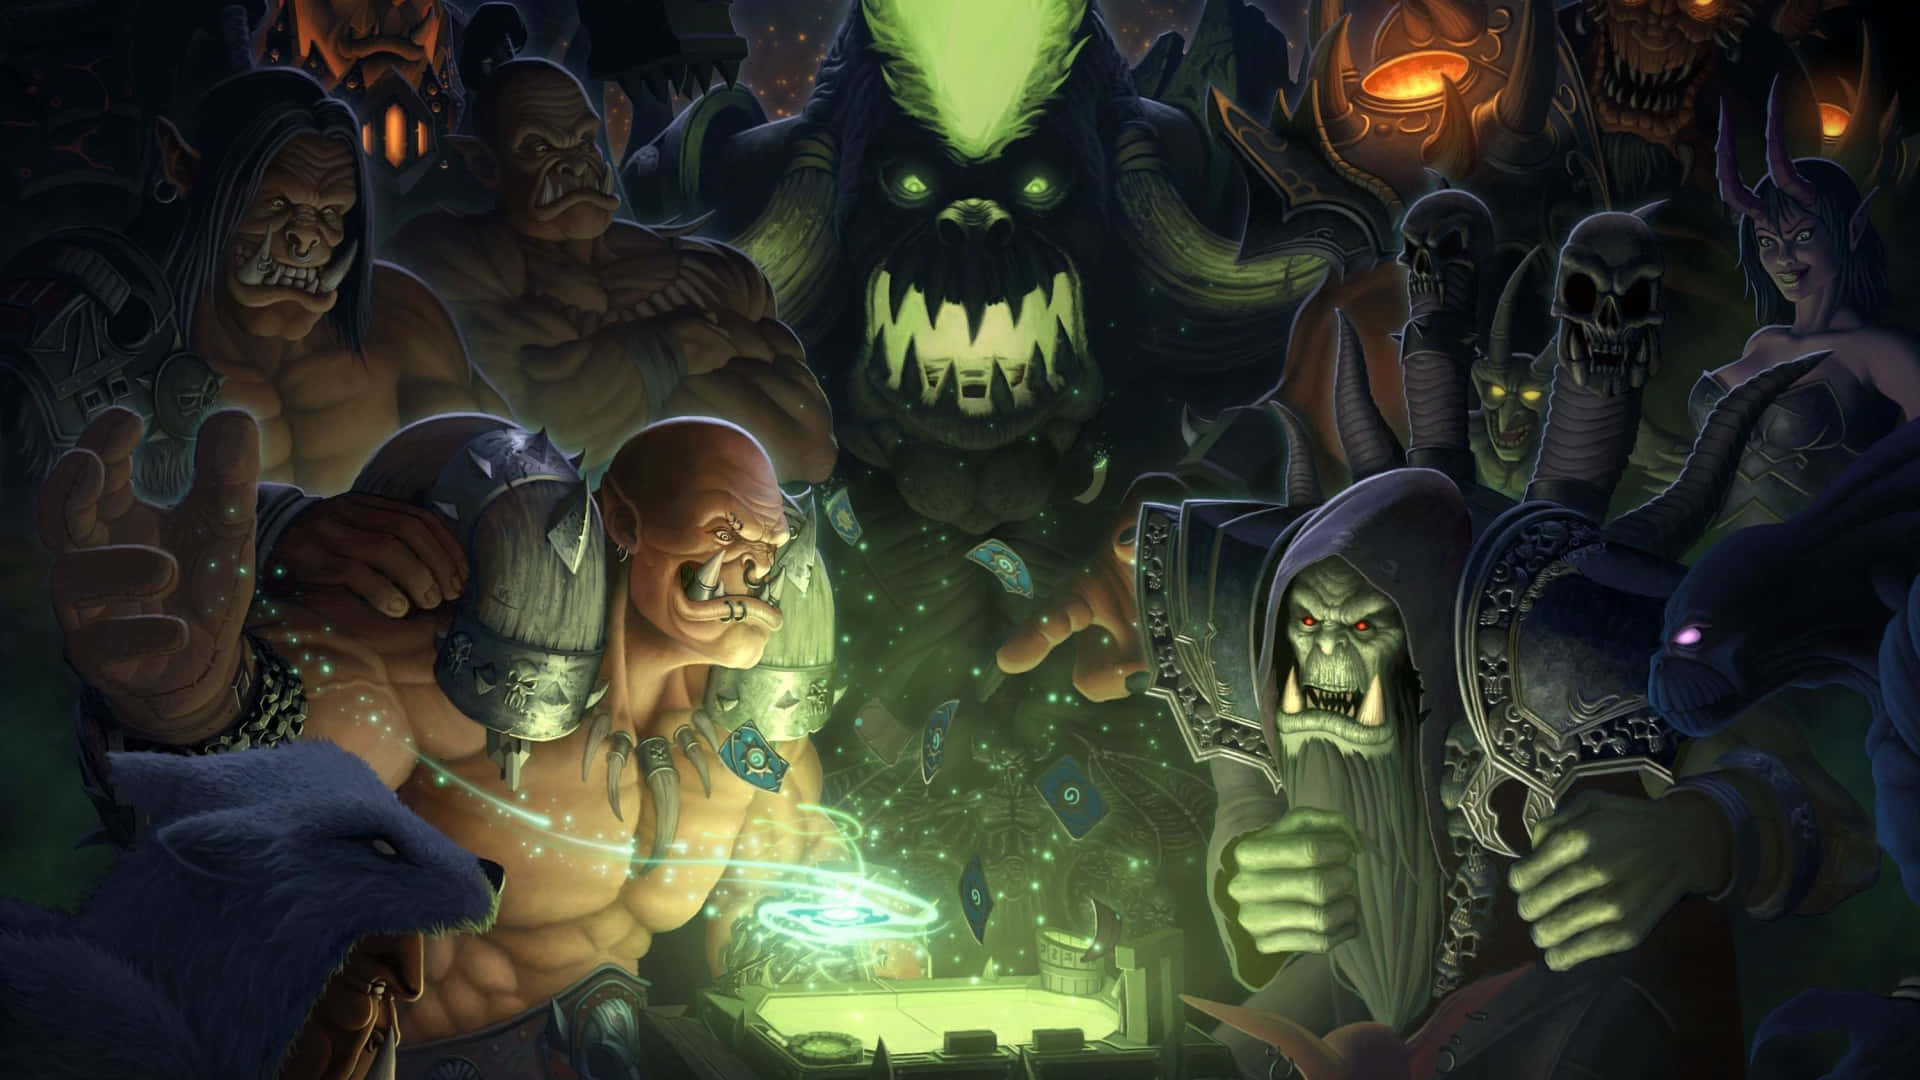 Get lost in the world of Hearthstone!